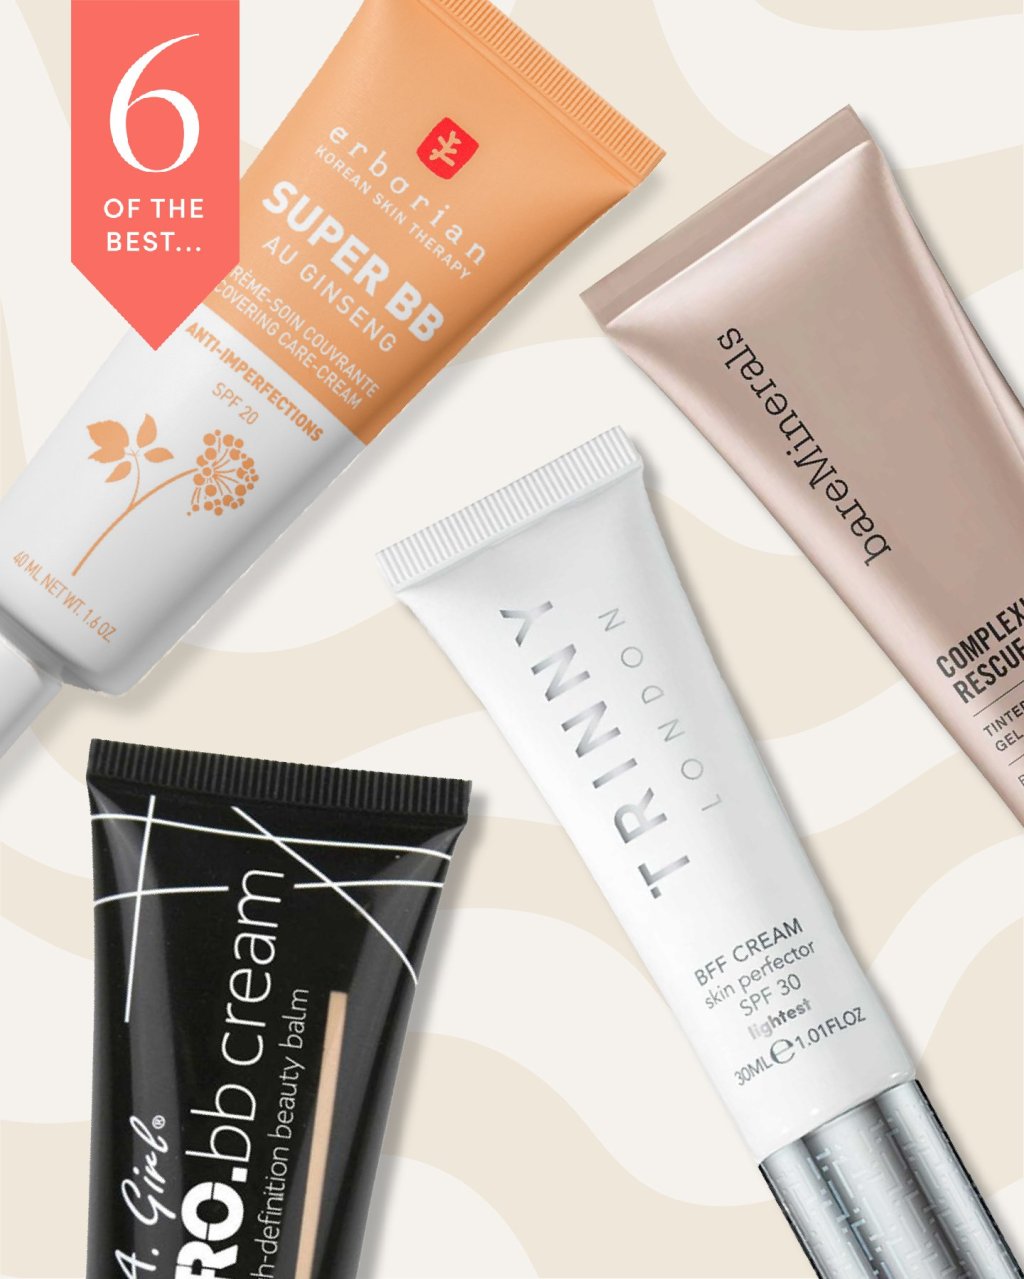 Skin Care For Summer Guide: Best Skincare Routine & Products